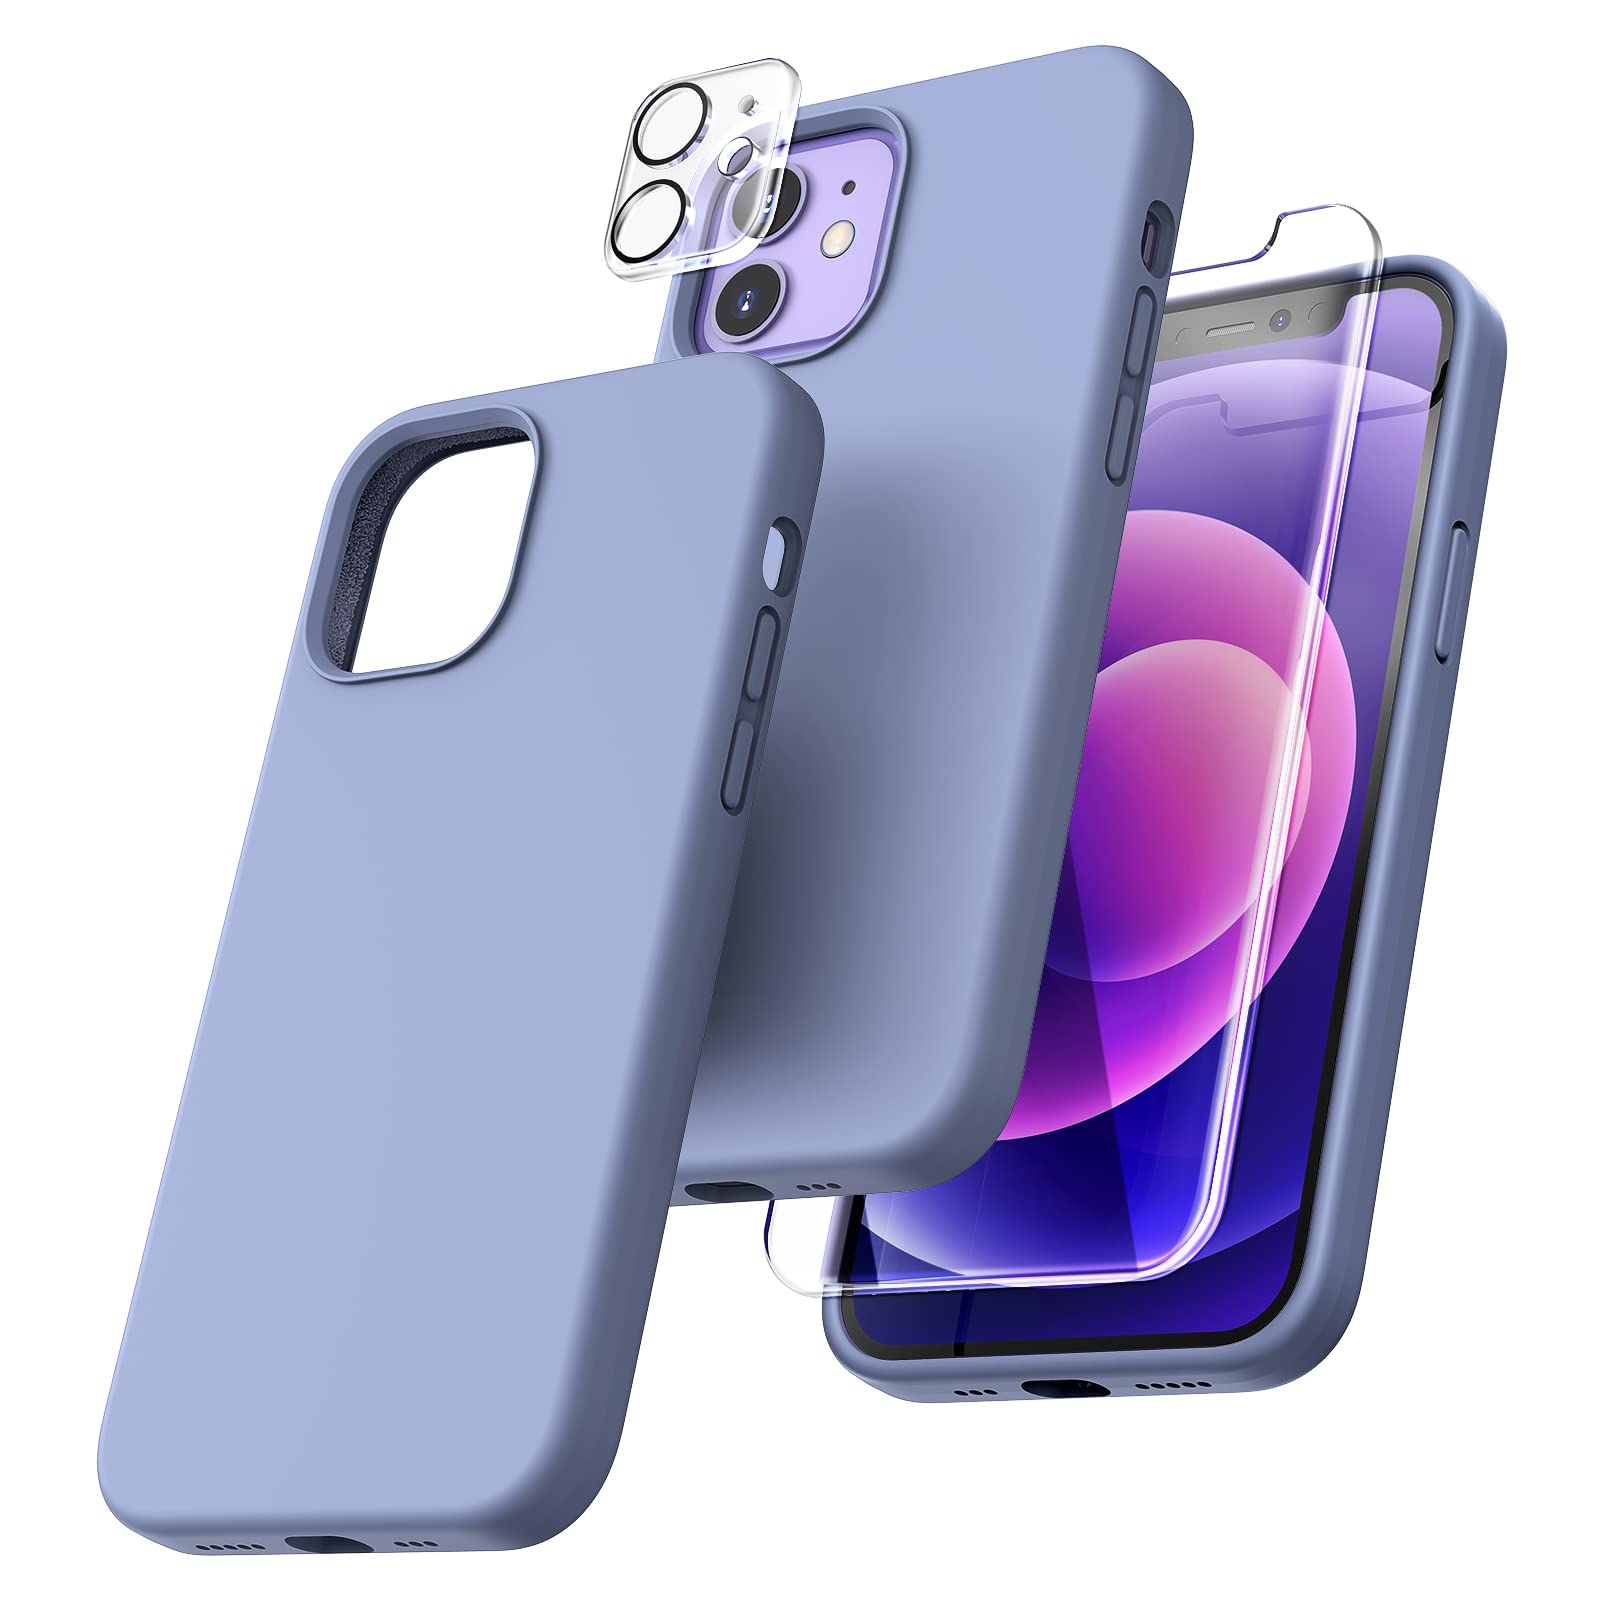 TOCOL [5 in 1 for iPhone 12 Case, for iPhone 12 Pro Case, with 2 Pack Screen Protector + 2 Pack Camera Lens Protector, Silicone Shockproof Phone Case [Anti-Scratch] [Drop Protection], Lavender Gray